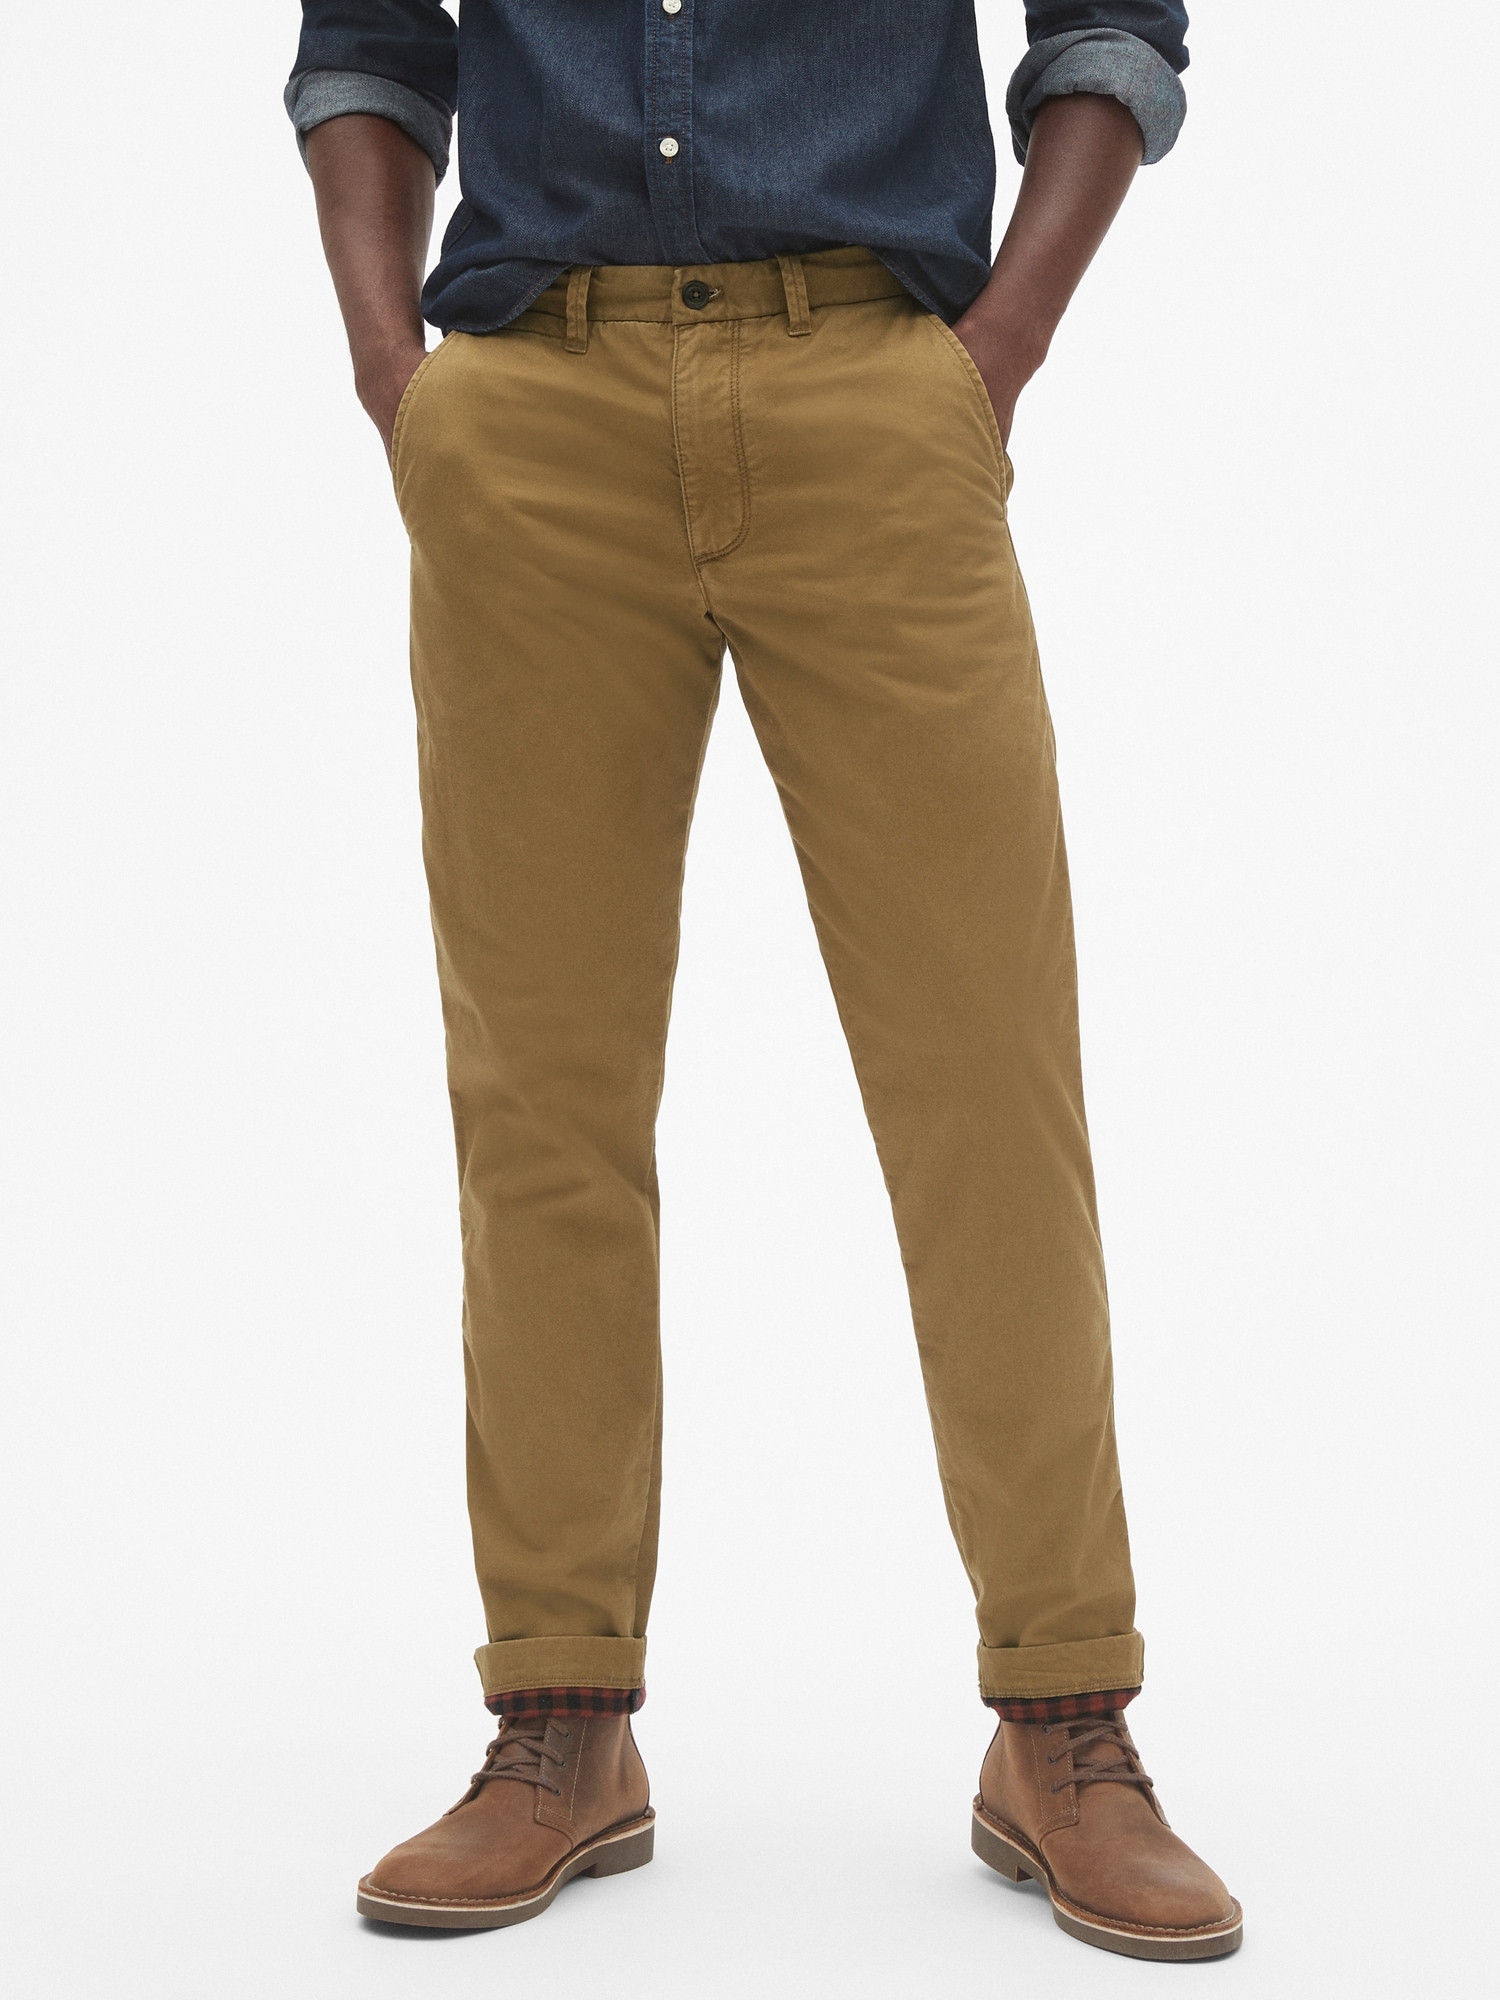 Flannel-Lined Khakis in Slim Fit with GapFlex